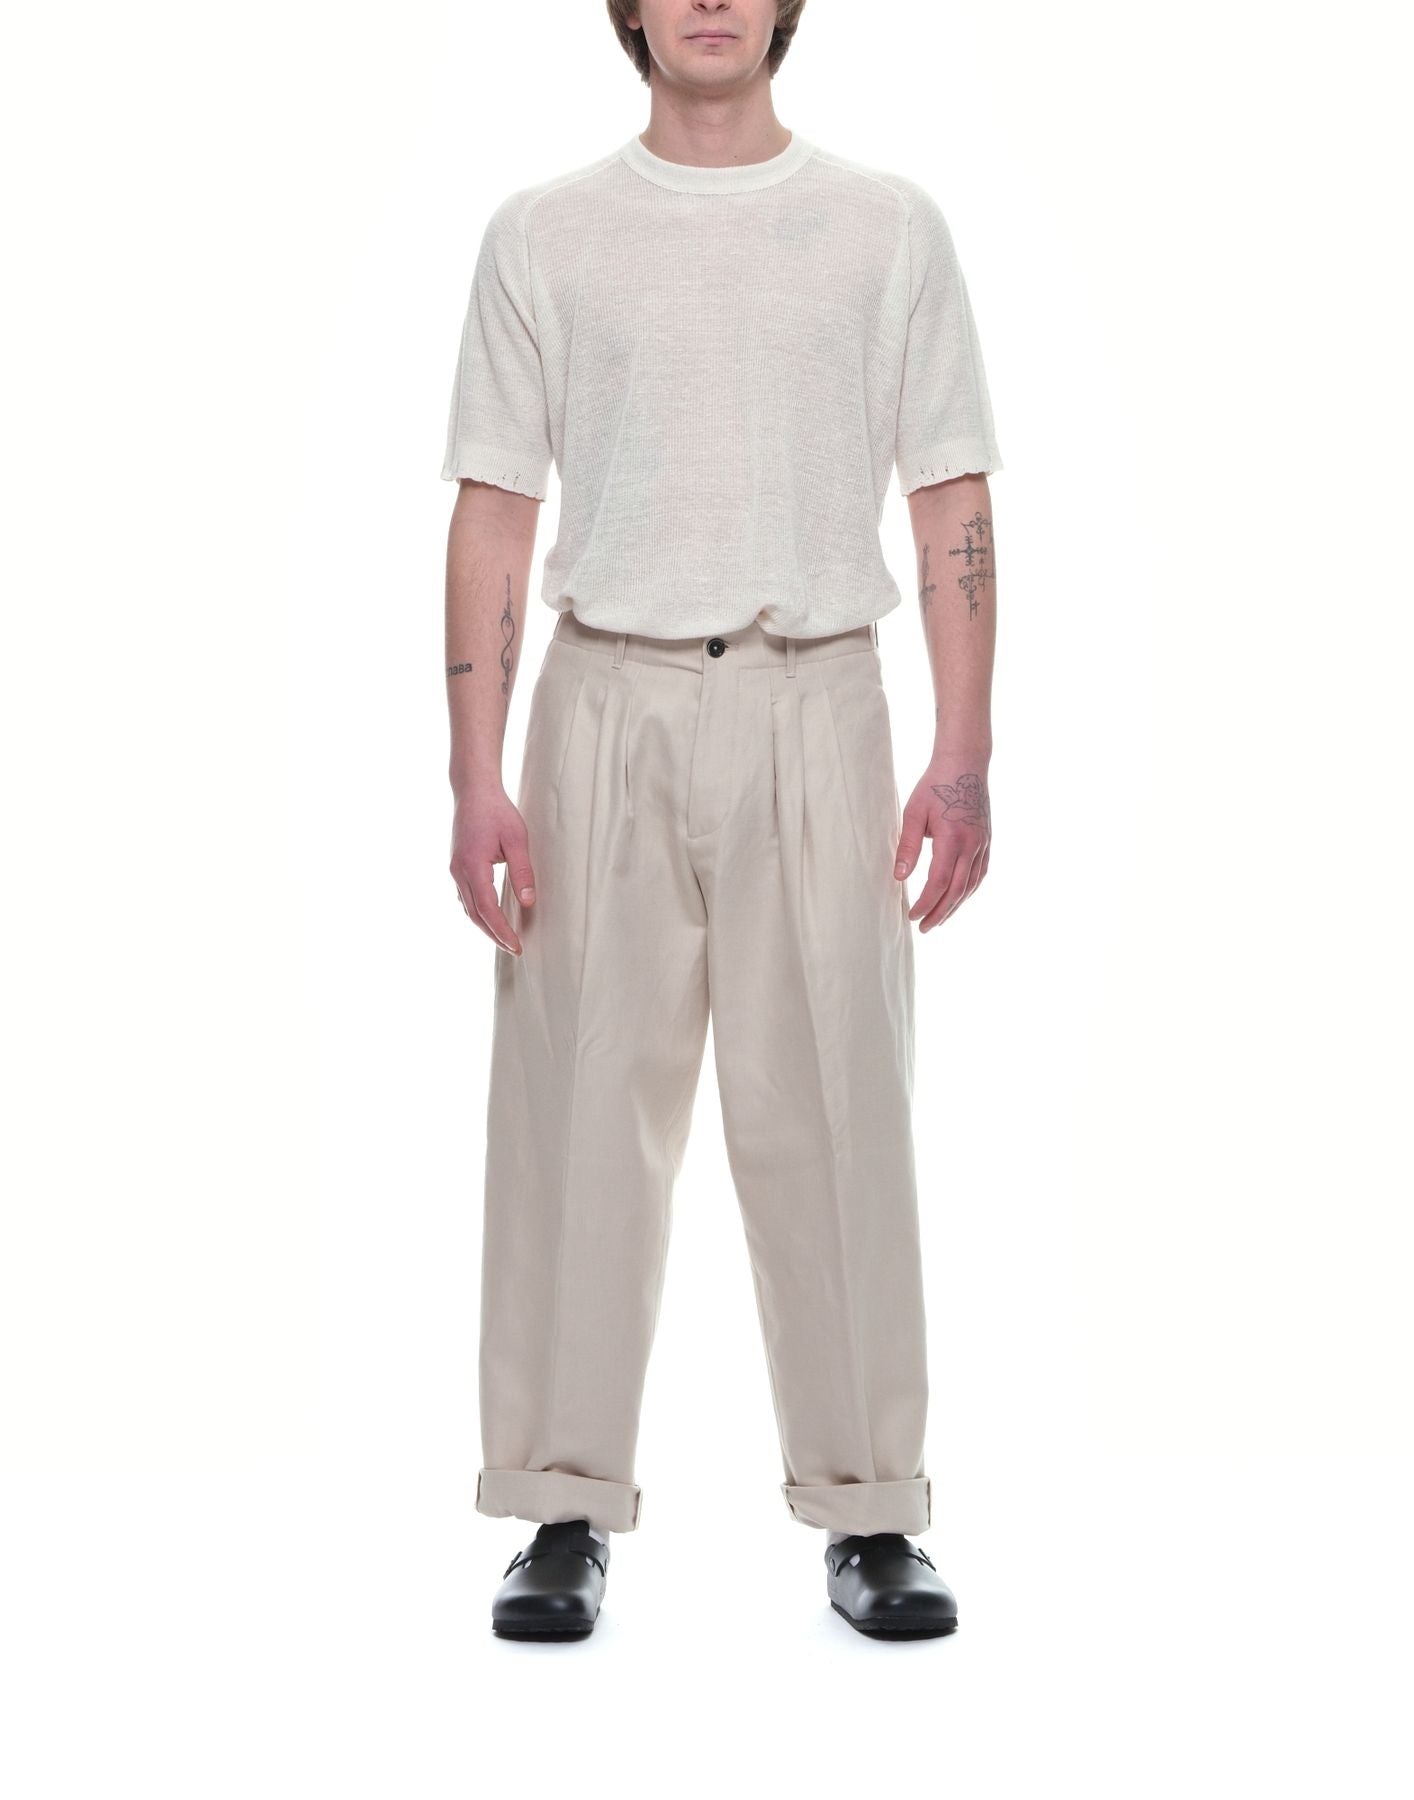 Pants for man COS17 COSMO CARROT CAMEL NINE:INTHE:MORNING